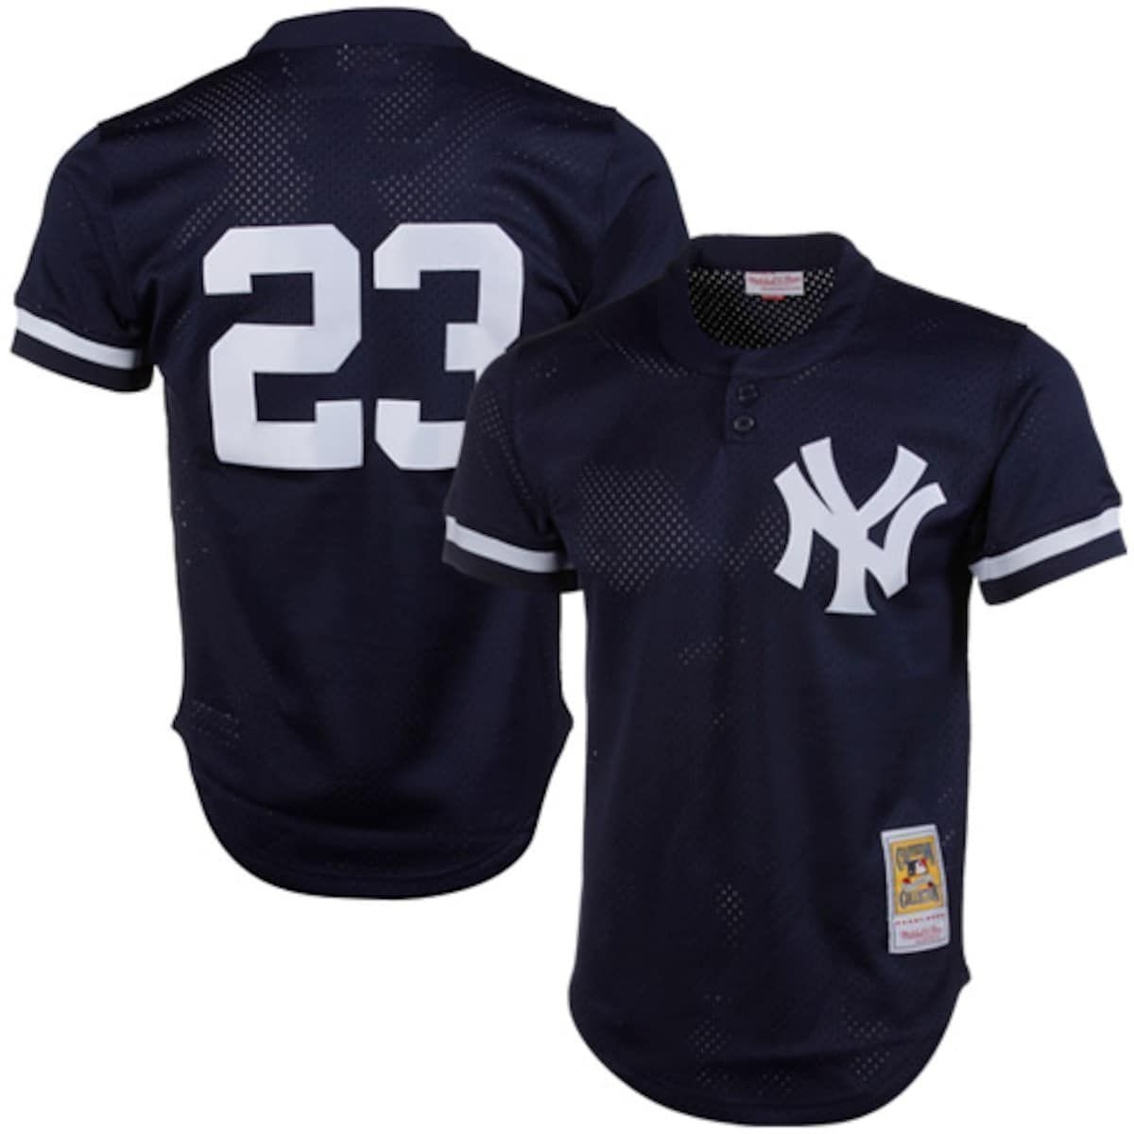 Mitchell & Ness Men's Don Mattingly Navy New York Yankees 1995 Authentic Cooperstown Collection Mesh Batting Practice Jersey - Image 2 of 4